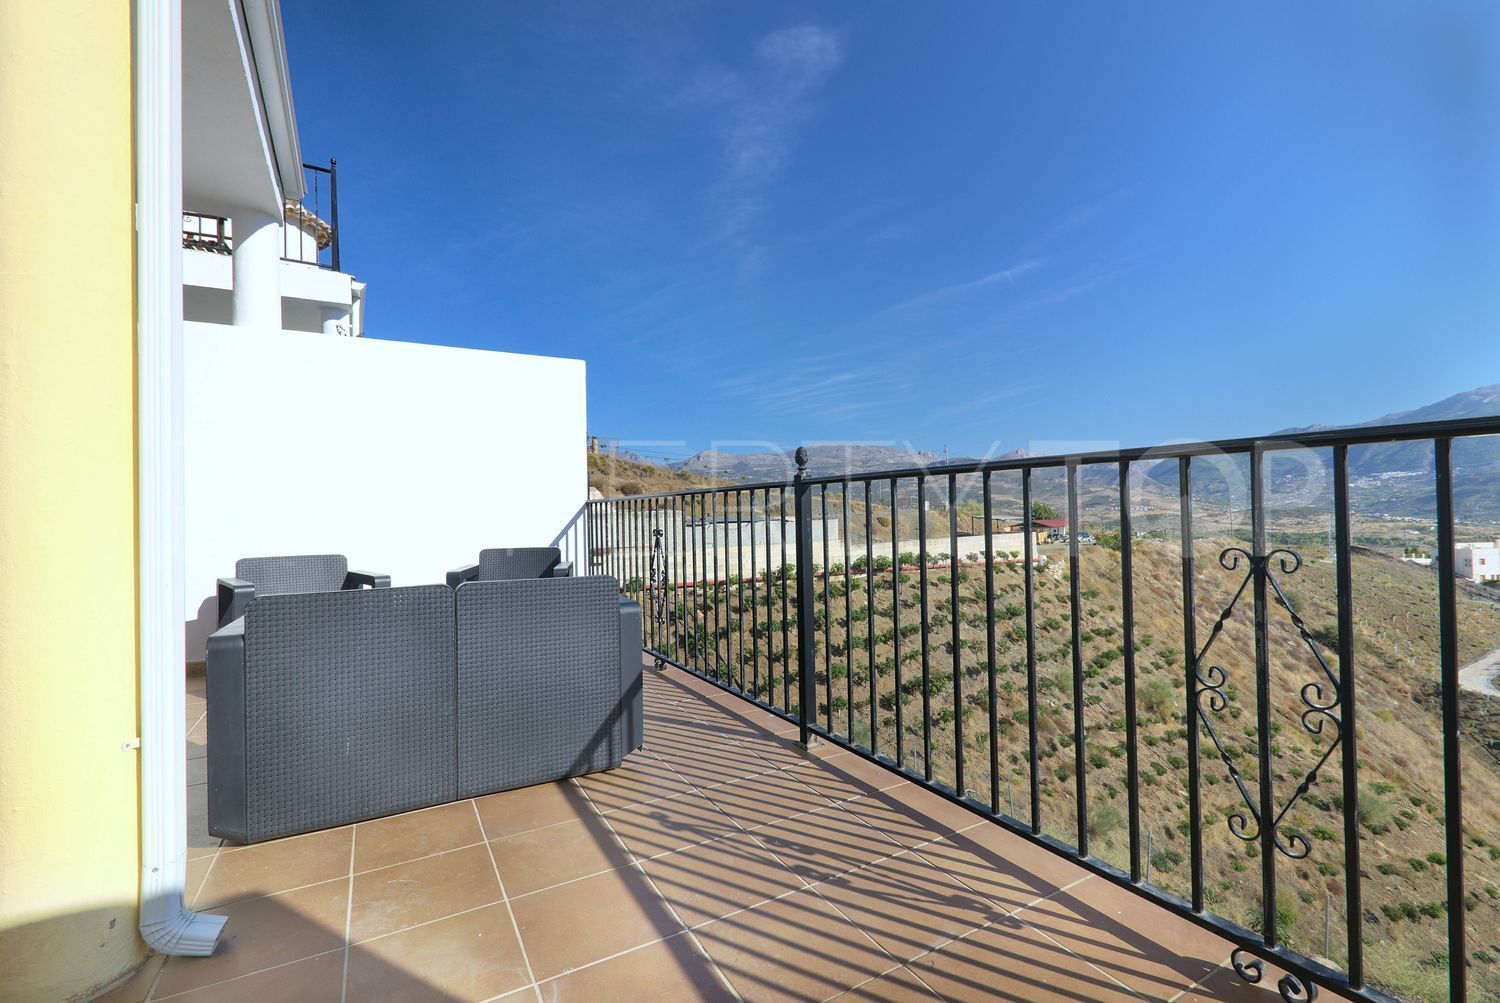 For sale house with 2 bedrooms in Viñuela